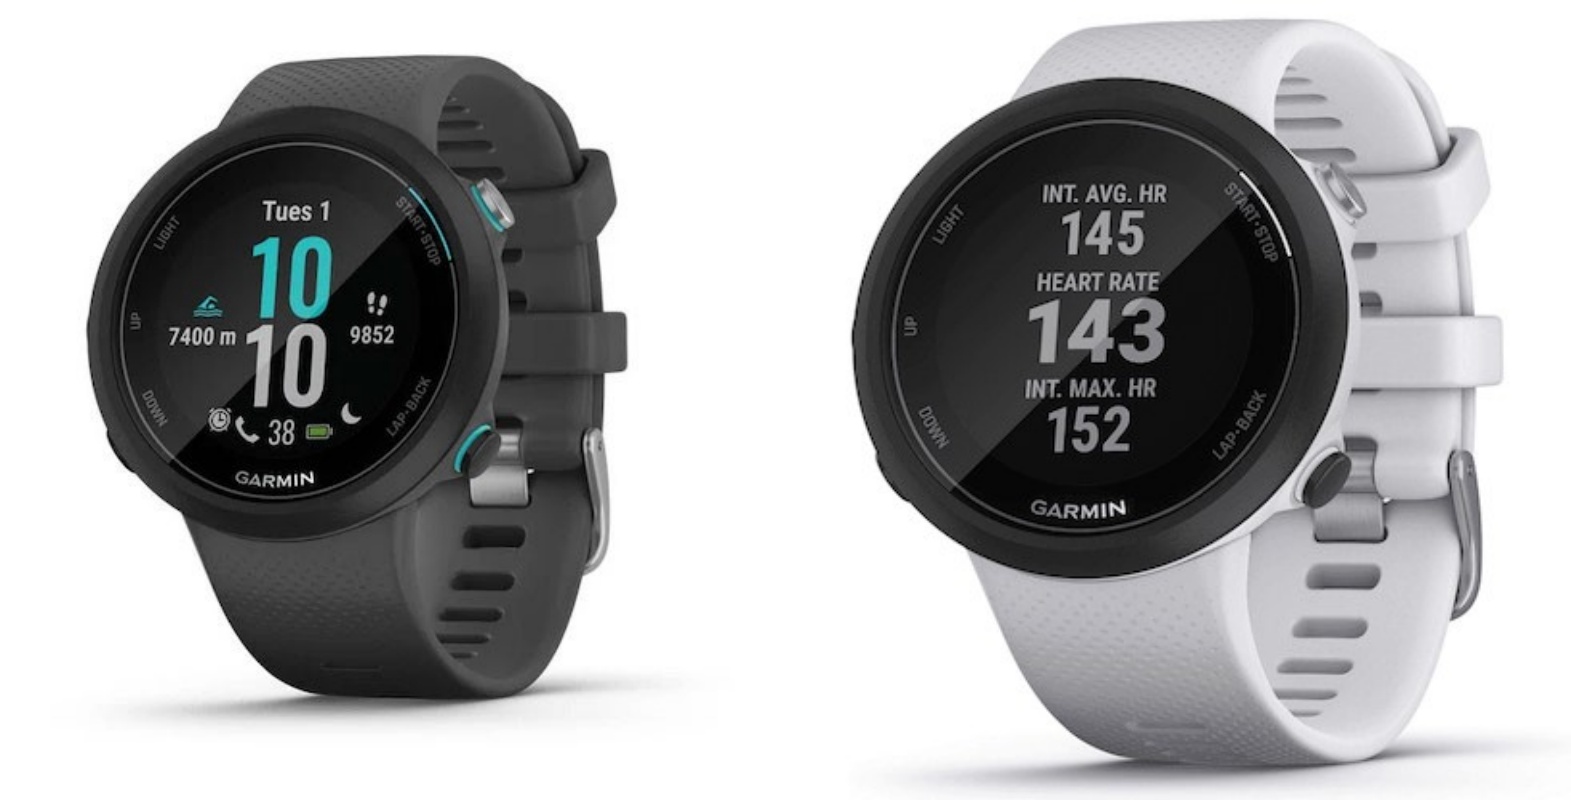 Garmin Swim 2 lets you monitor your heart rate underwater